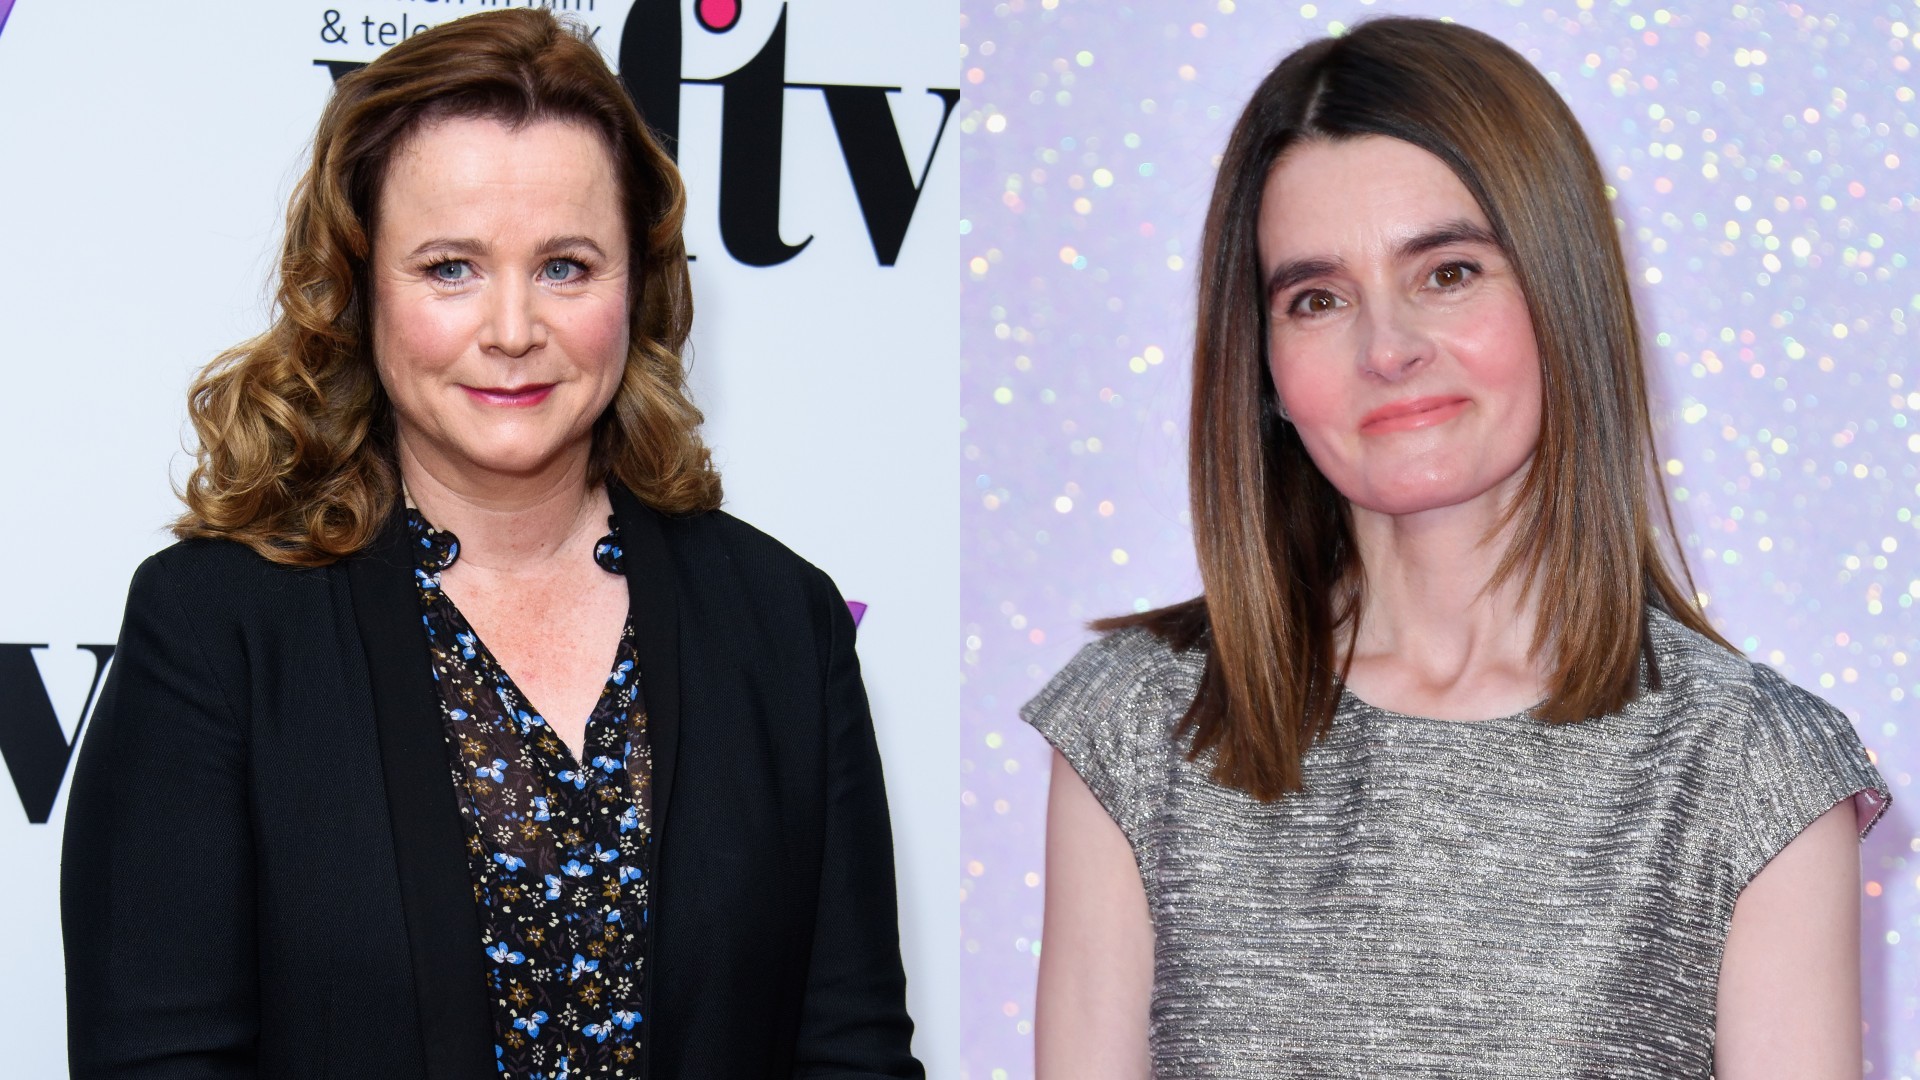 Casting News: Emily Watson and Shirley Henderson to Star in 'Dune' Prequel Series